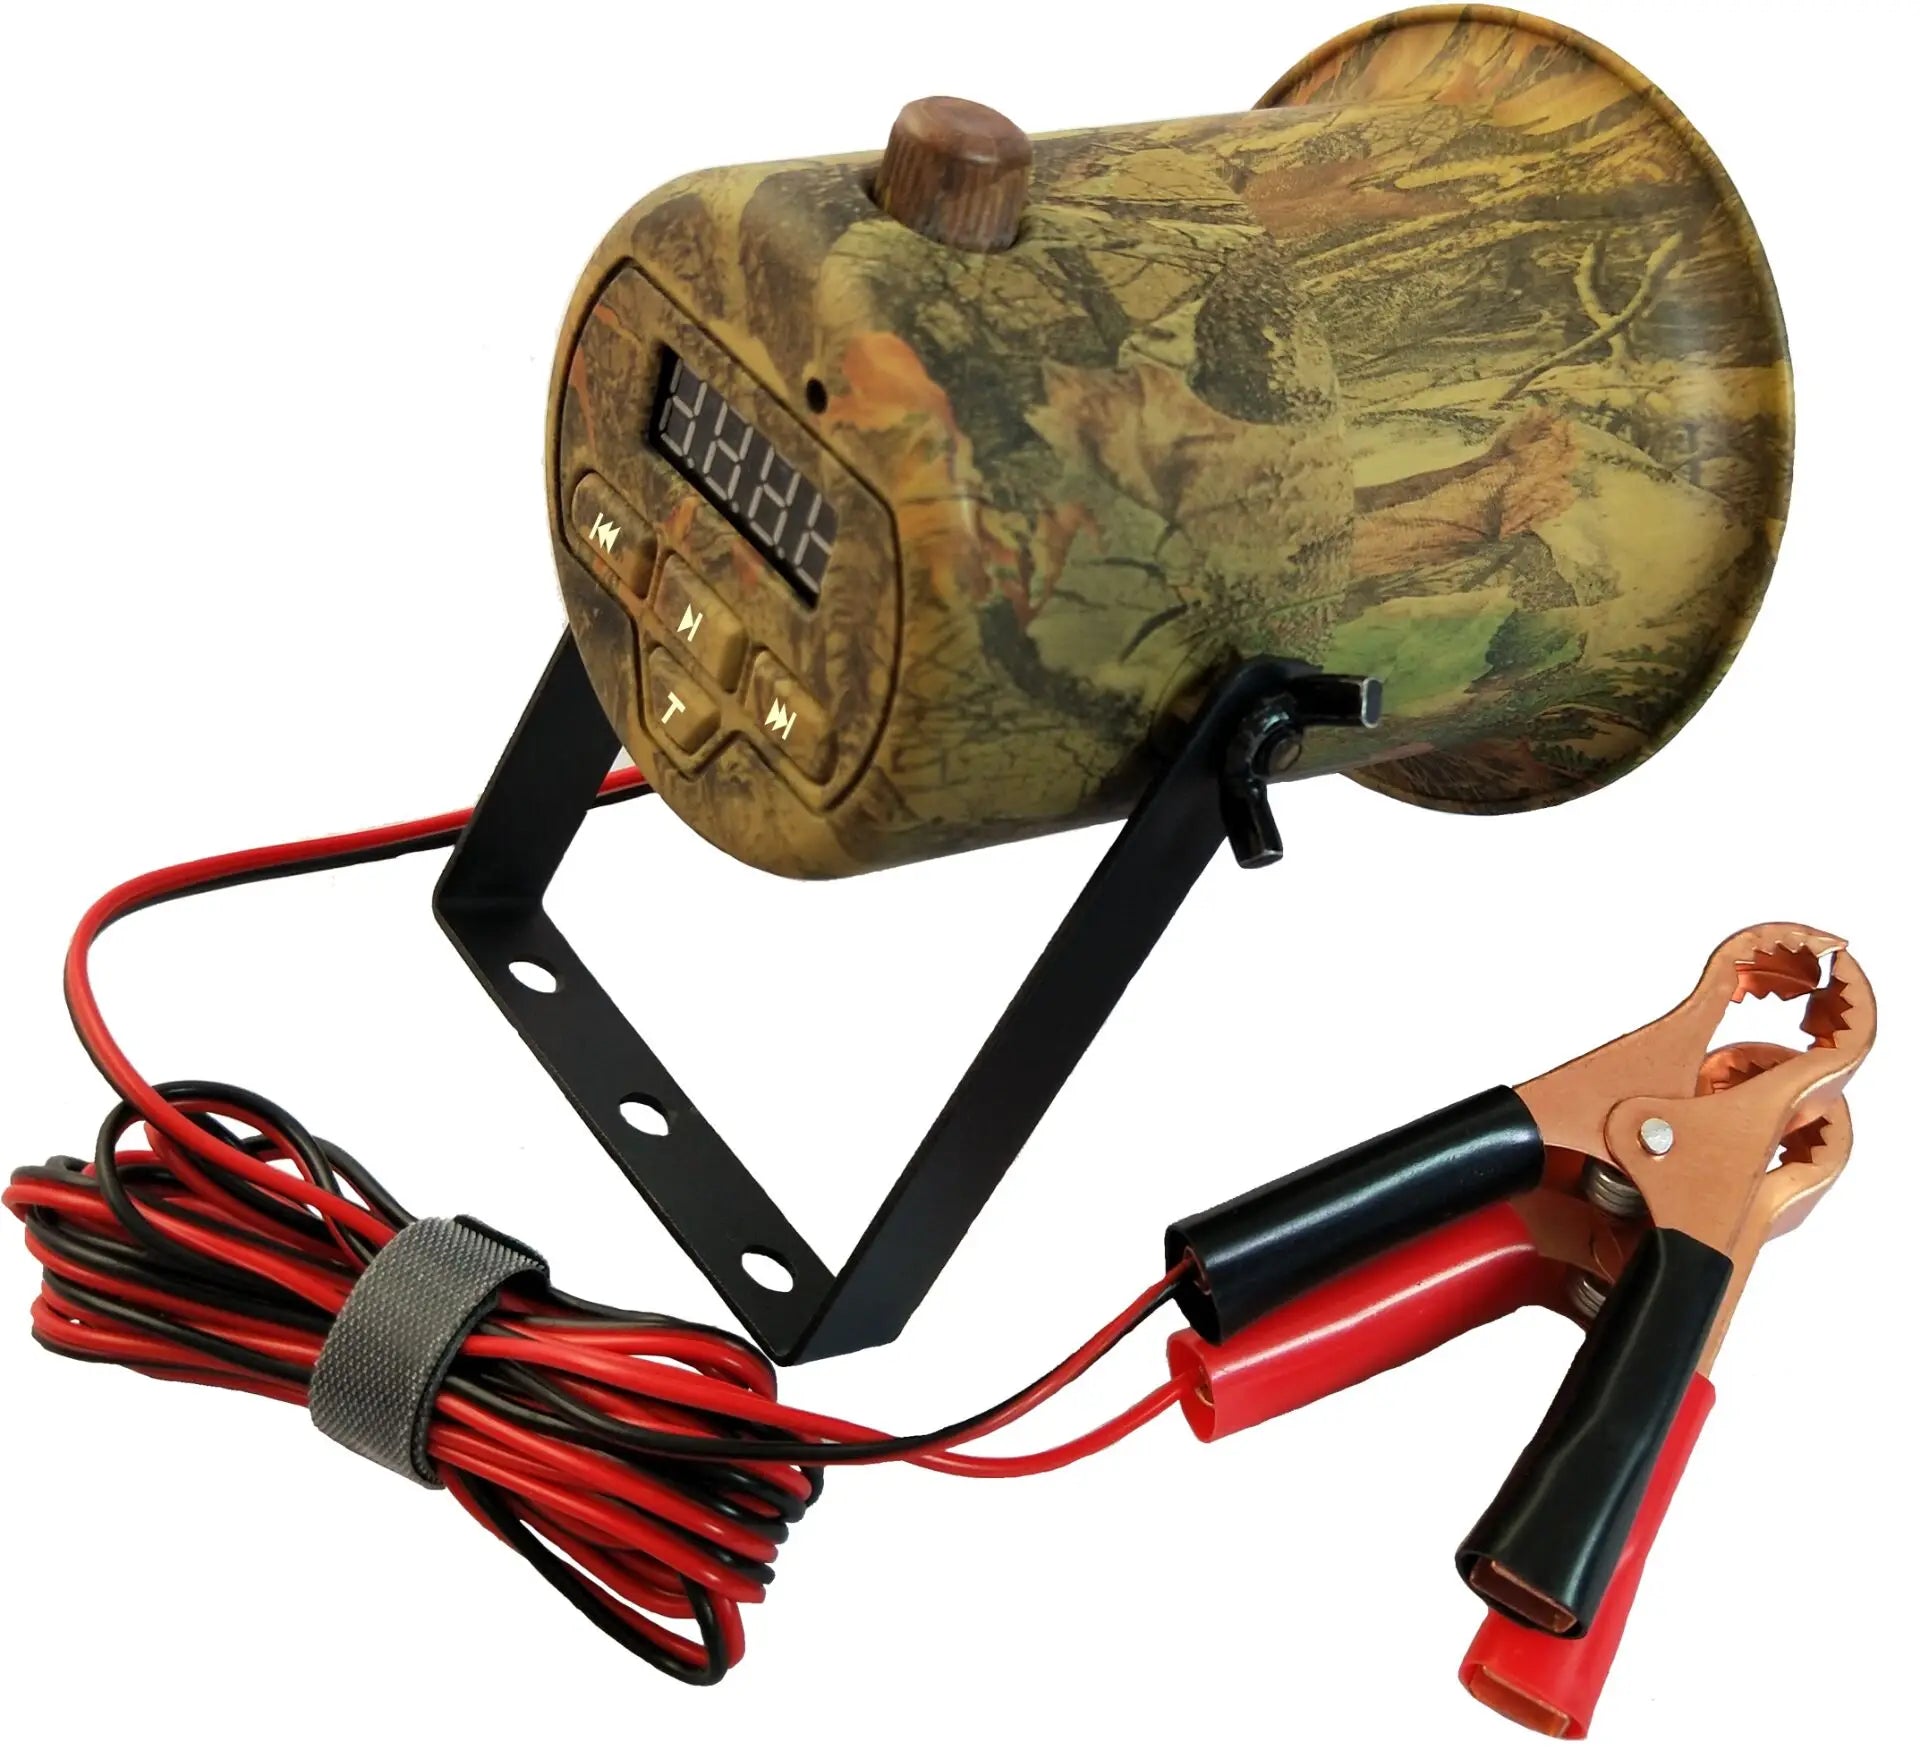 Digital Quail Sounds MP3 Device for Hunting